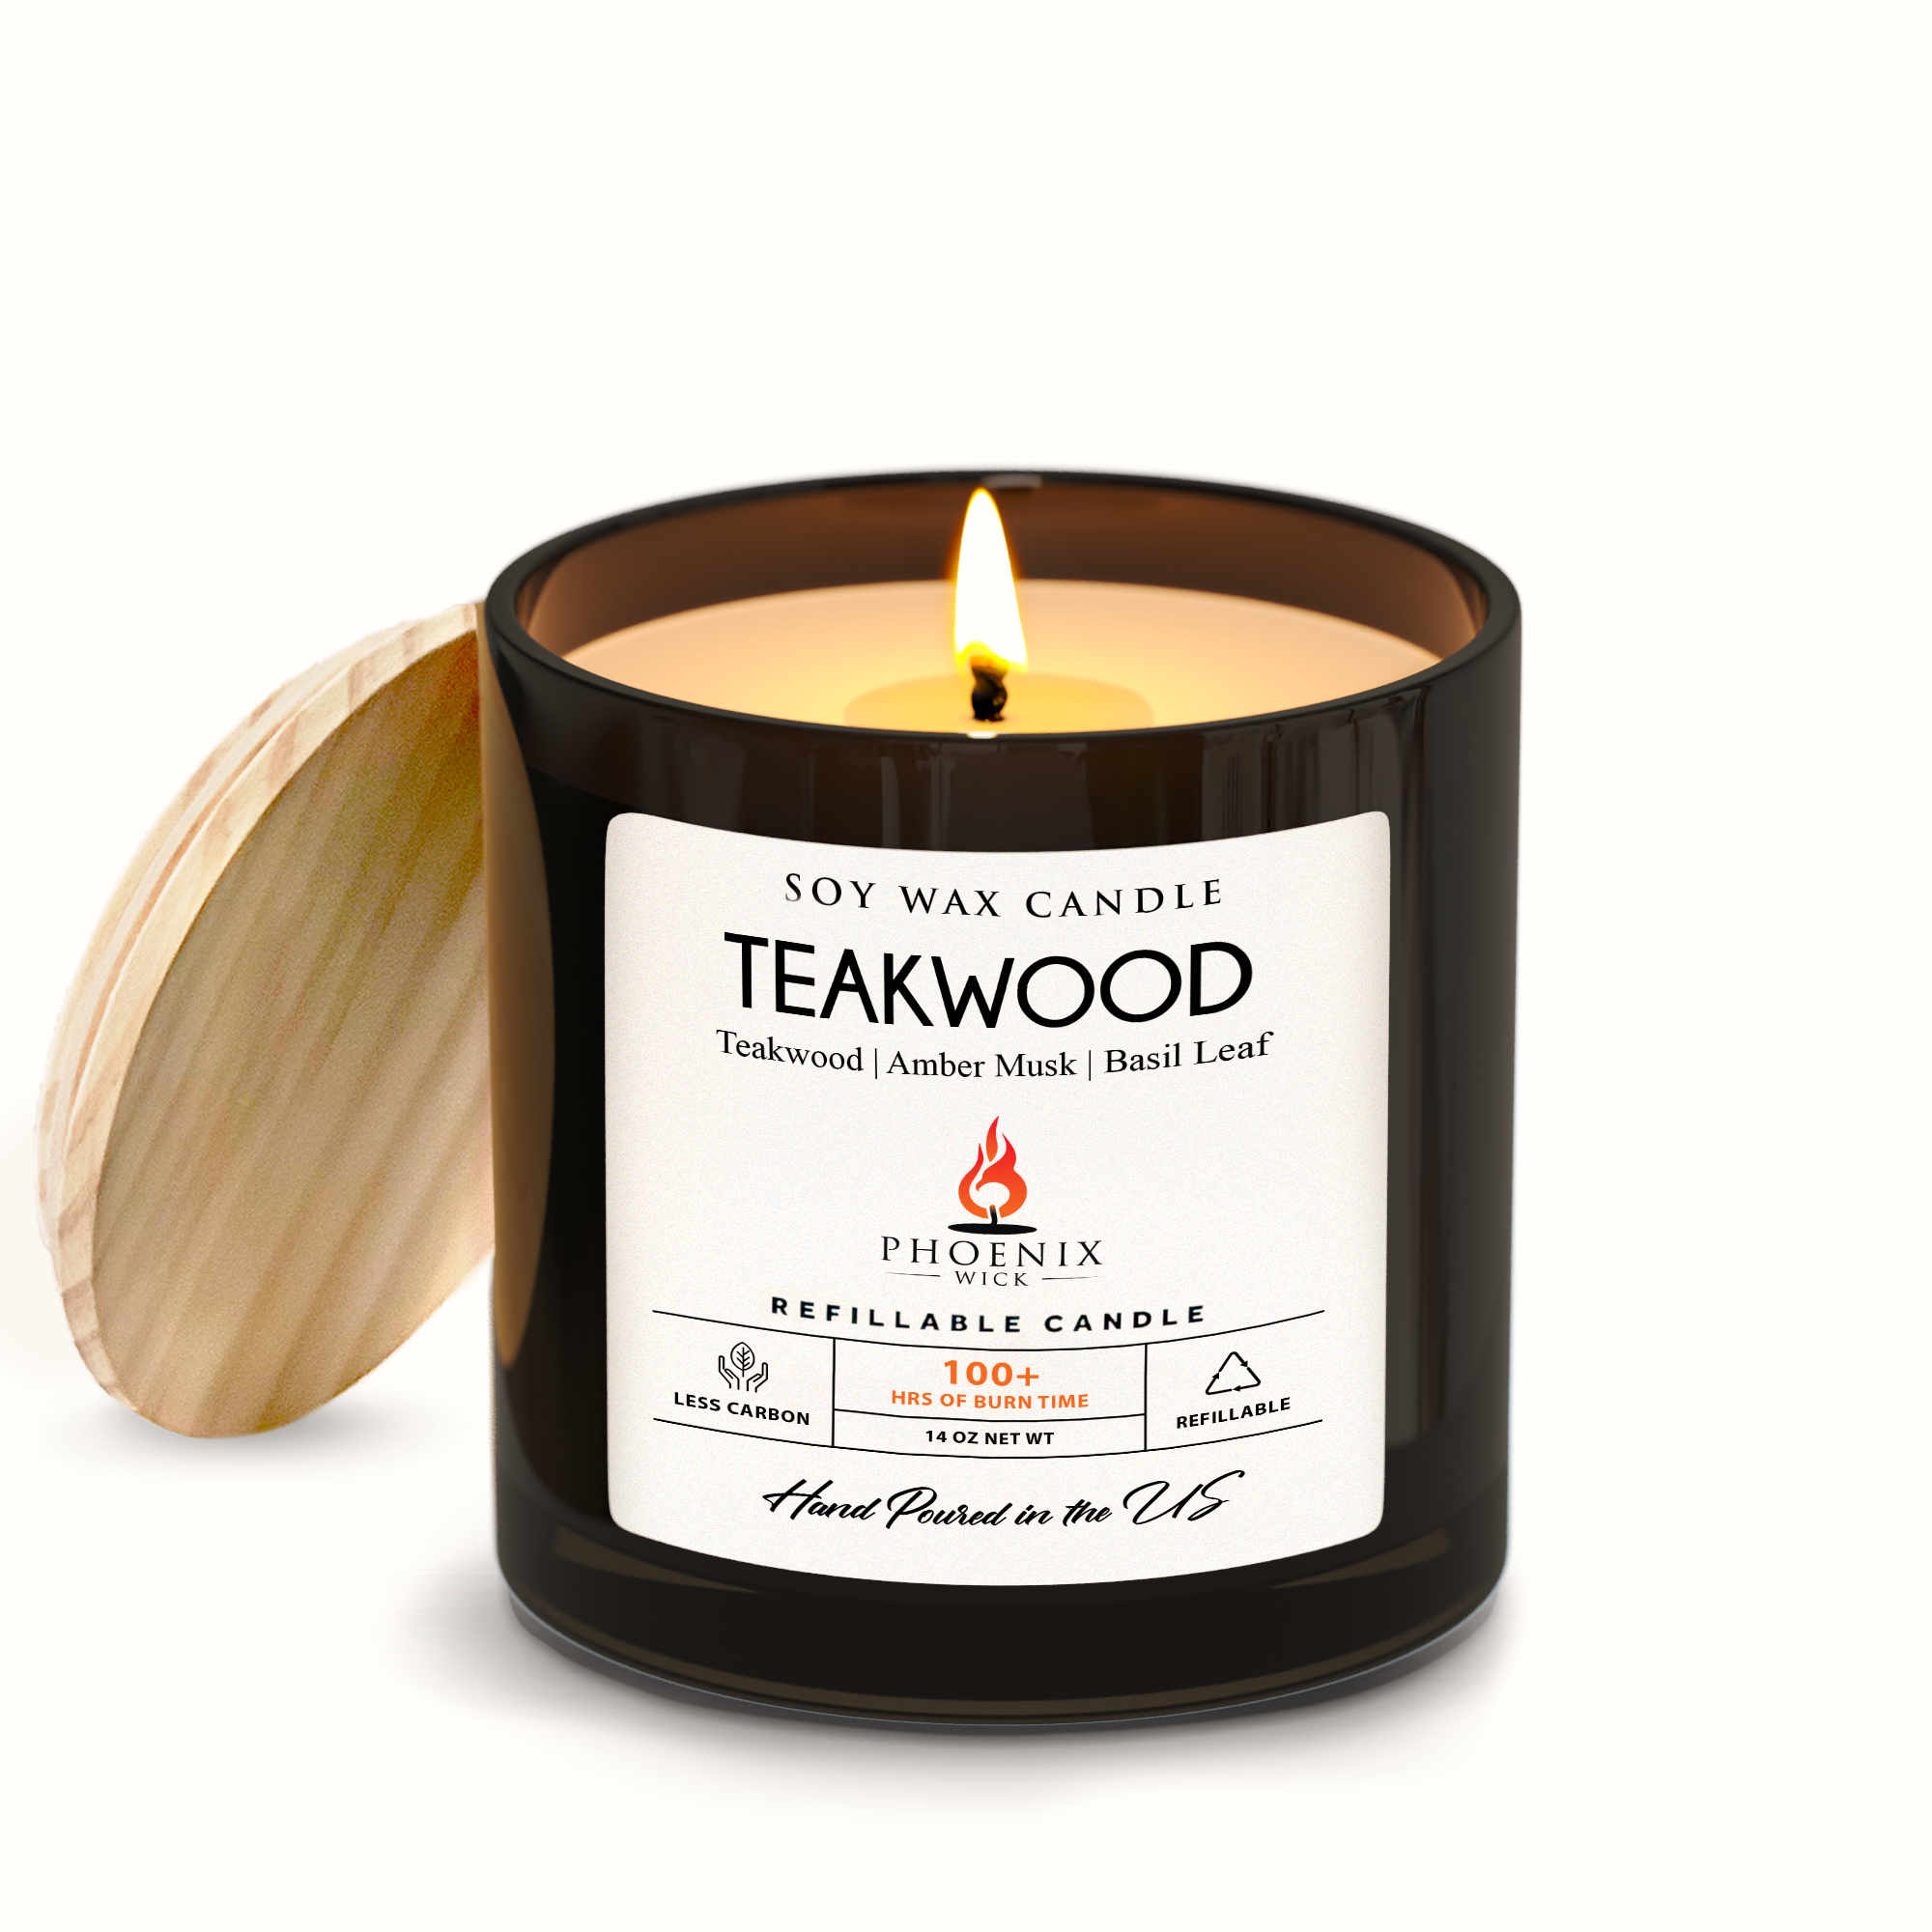 Long wood wick for candle making – ashandoakcandleco